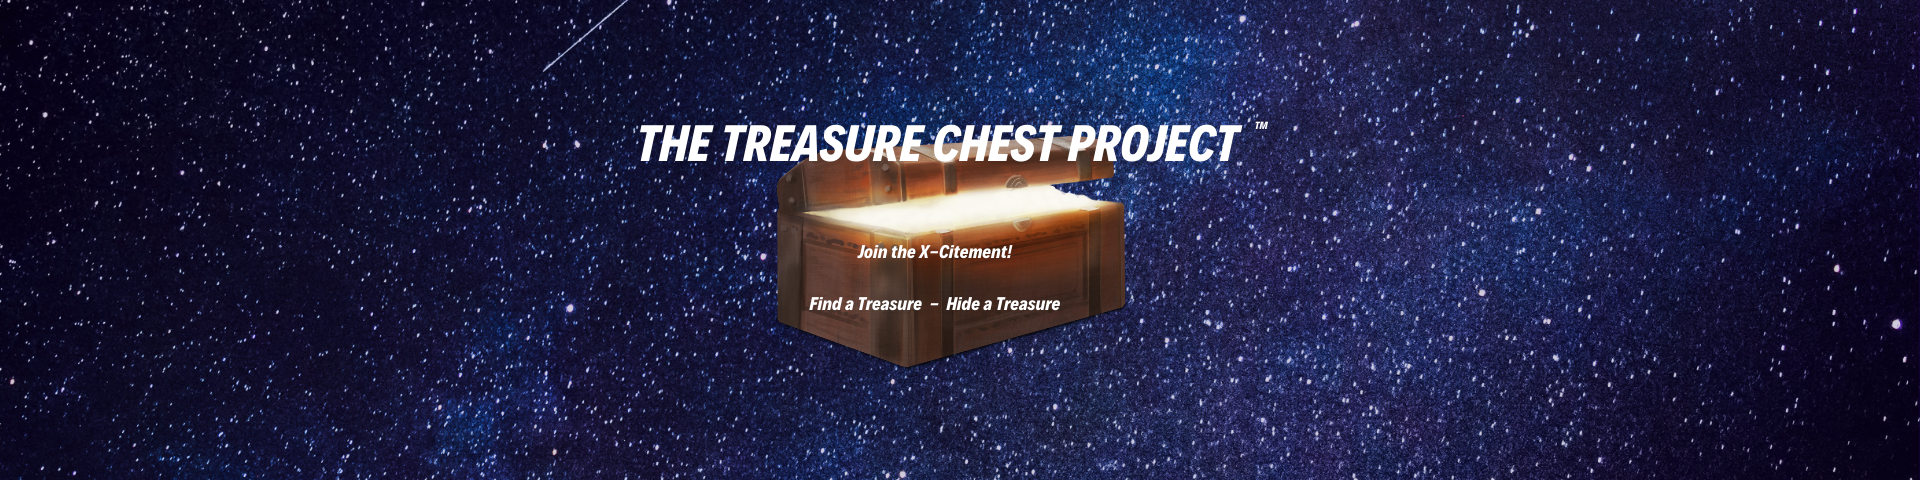 Category: The Treasure Chest Project Blog